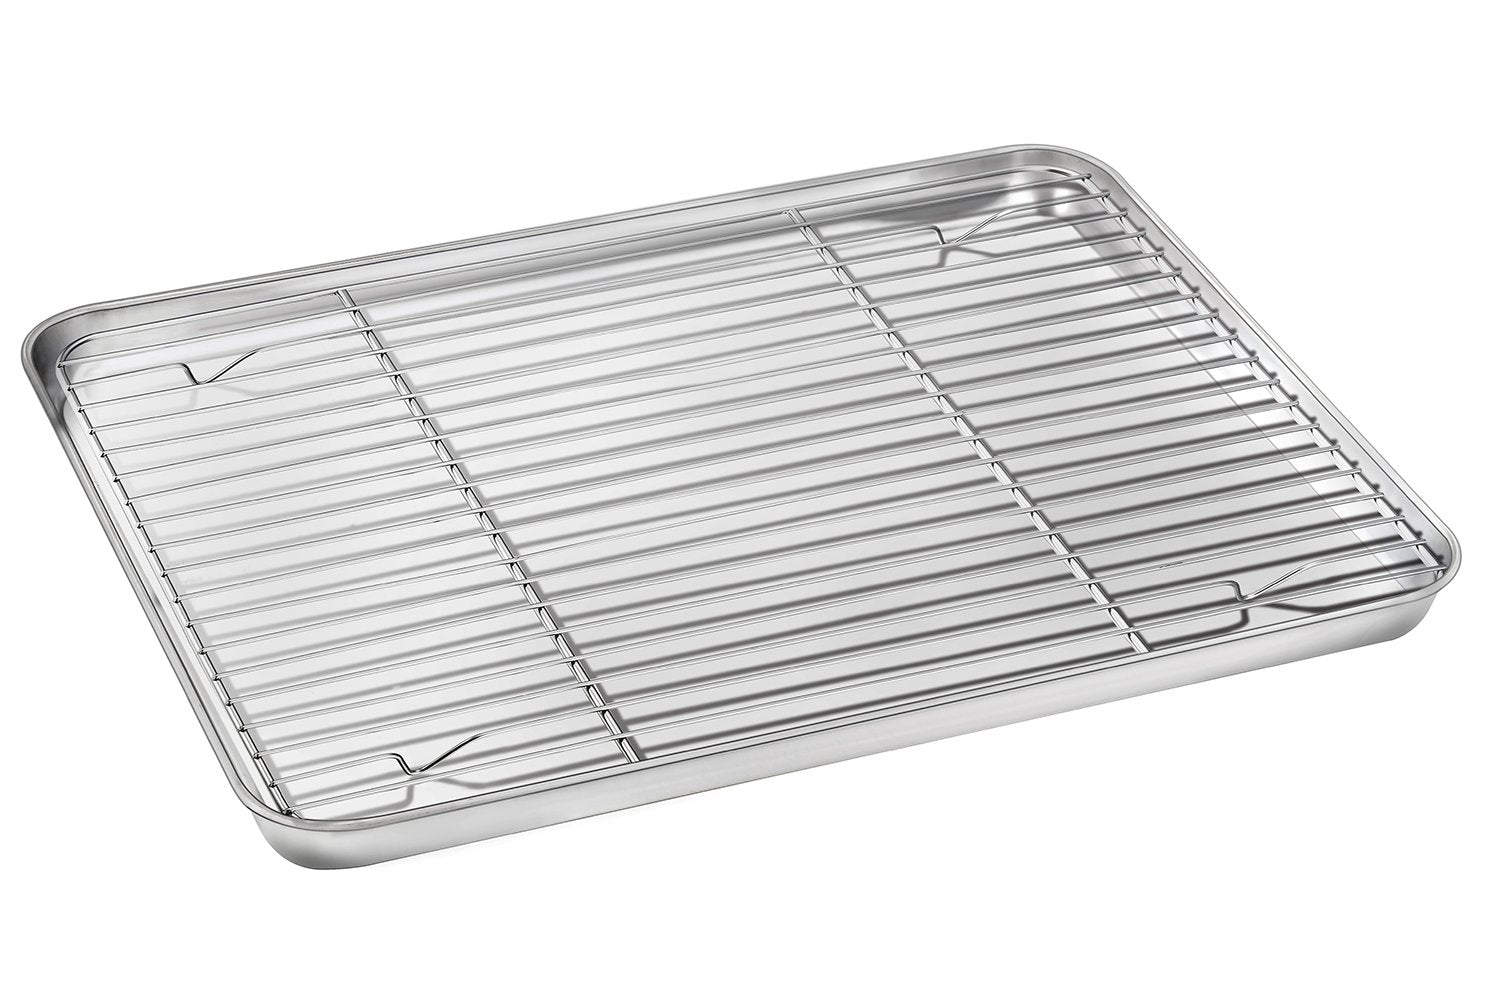 Baking Sheet with Rack Set, E-far Stainless Steel Baking Pan Cookie Pan with Cooling Rack, 16 x 12 x 1 inch, Rust Free & Non Toxic, Mirror Finish & Dishwasher Safe